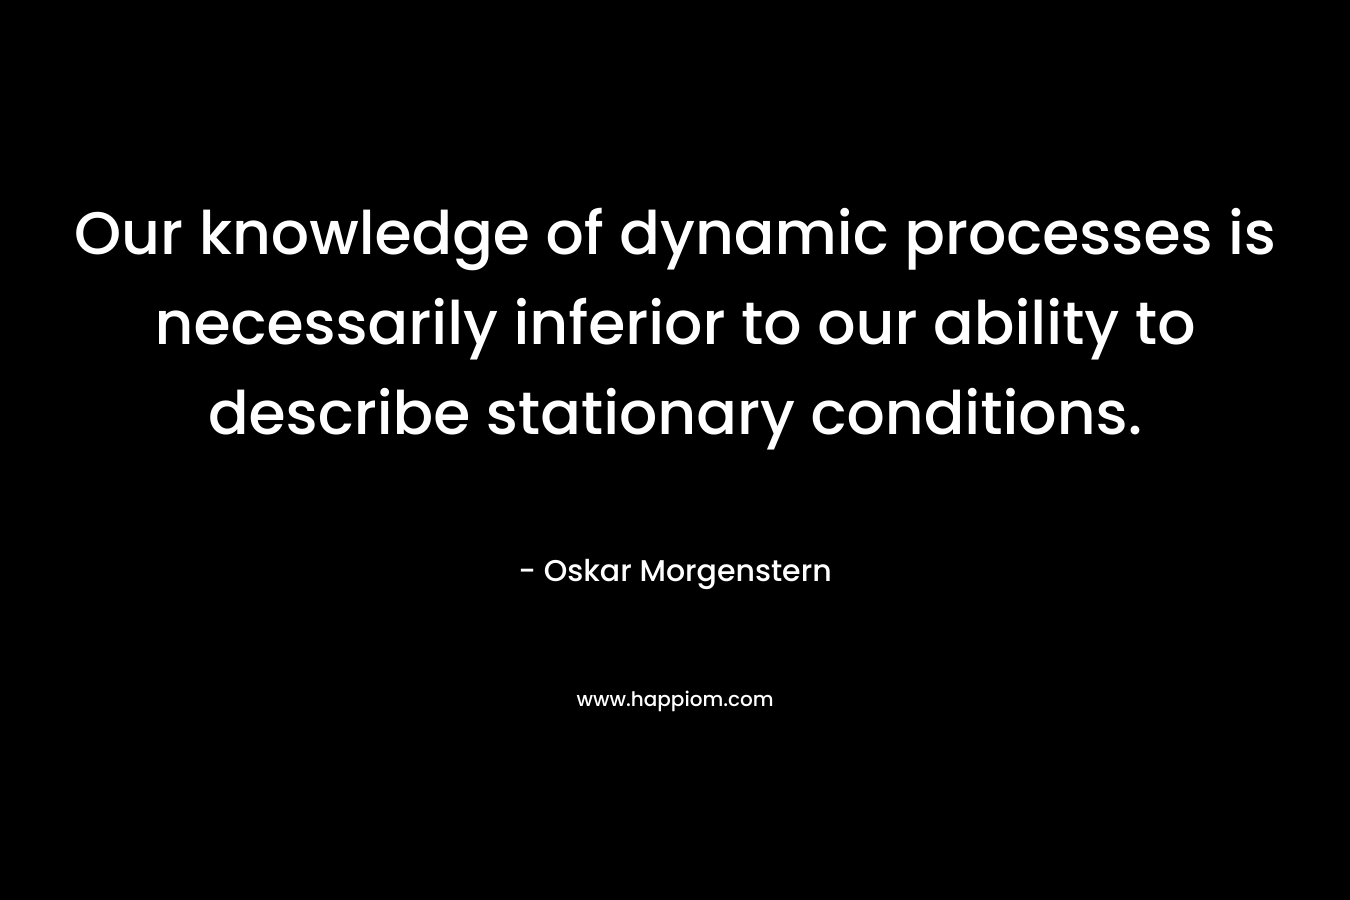 Our knowledge of dynamic processes is necessarily inferior to our ability to describe stationary conditions.